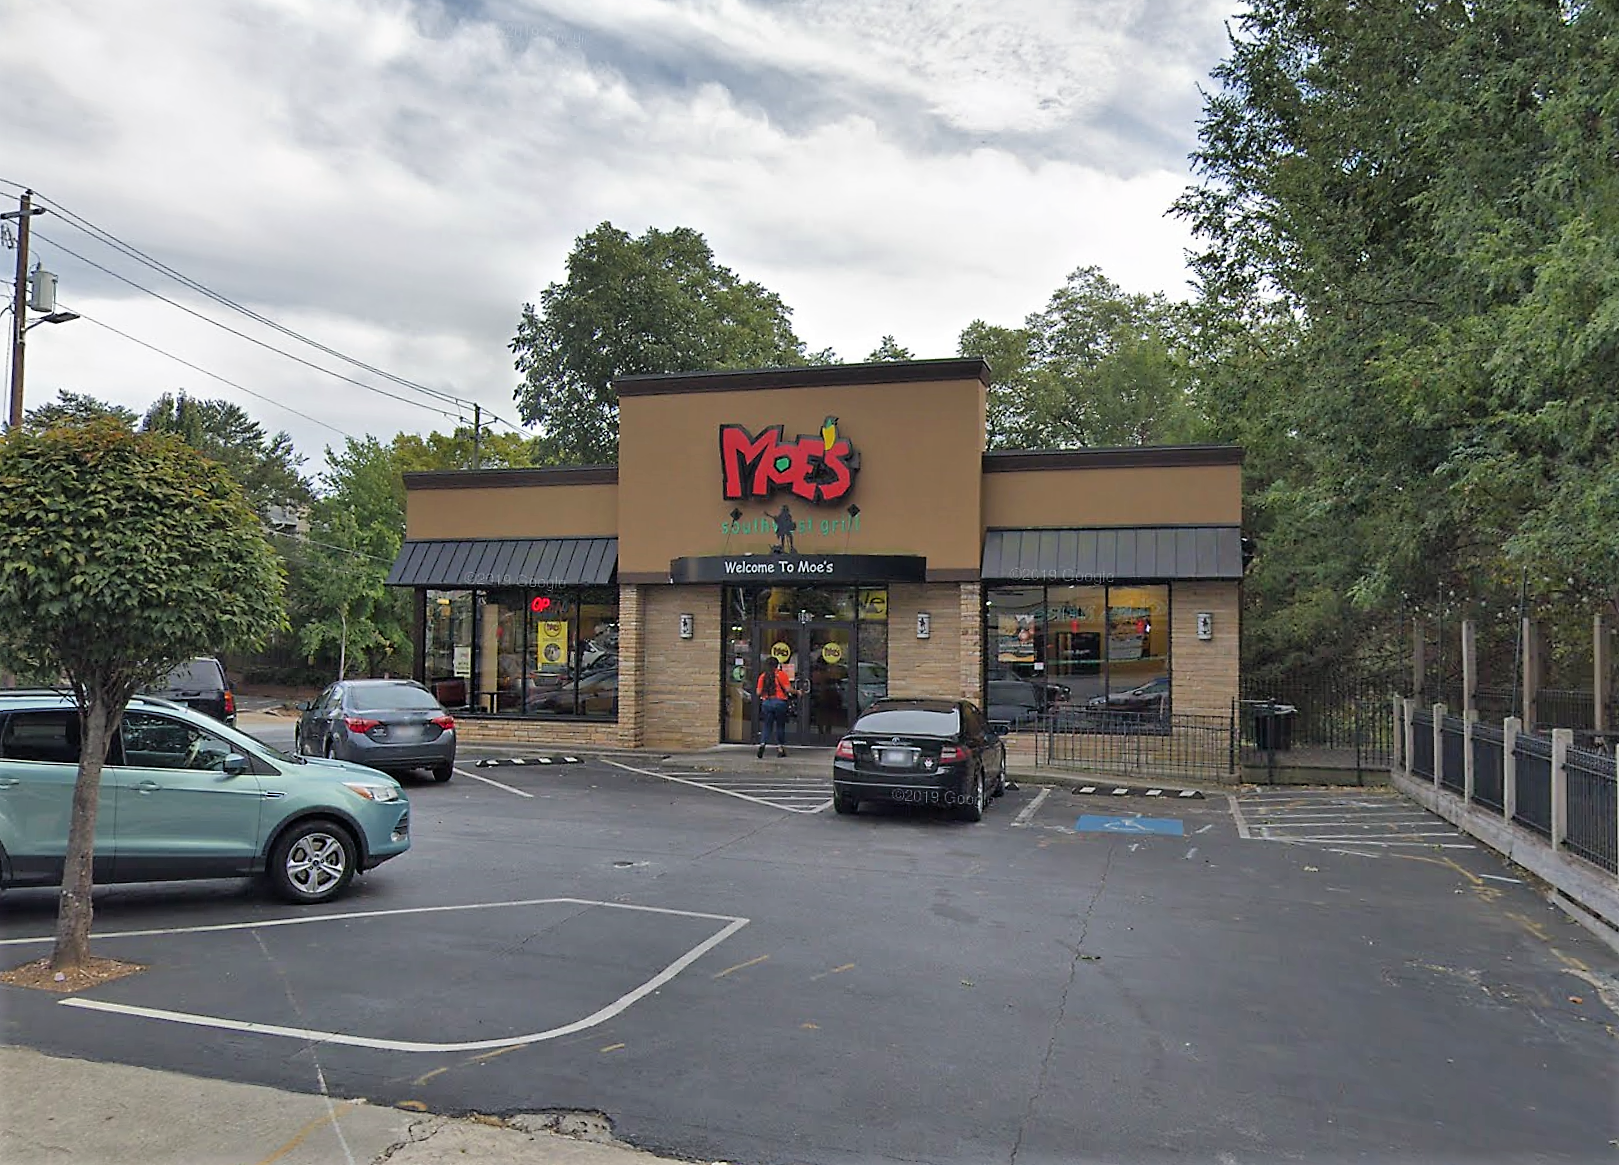 A tan, stucco-faced restaurant with the bright red Moe’s logo in front of the trees of Freedom Park.